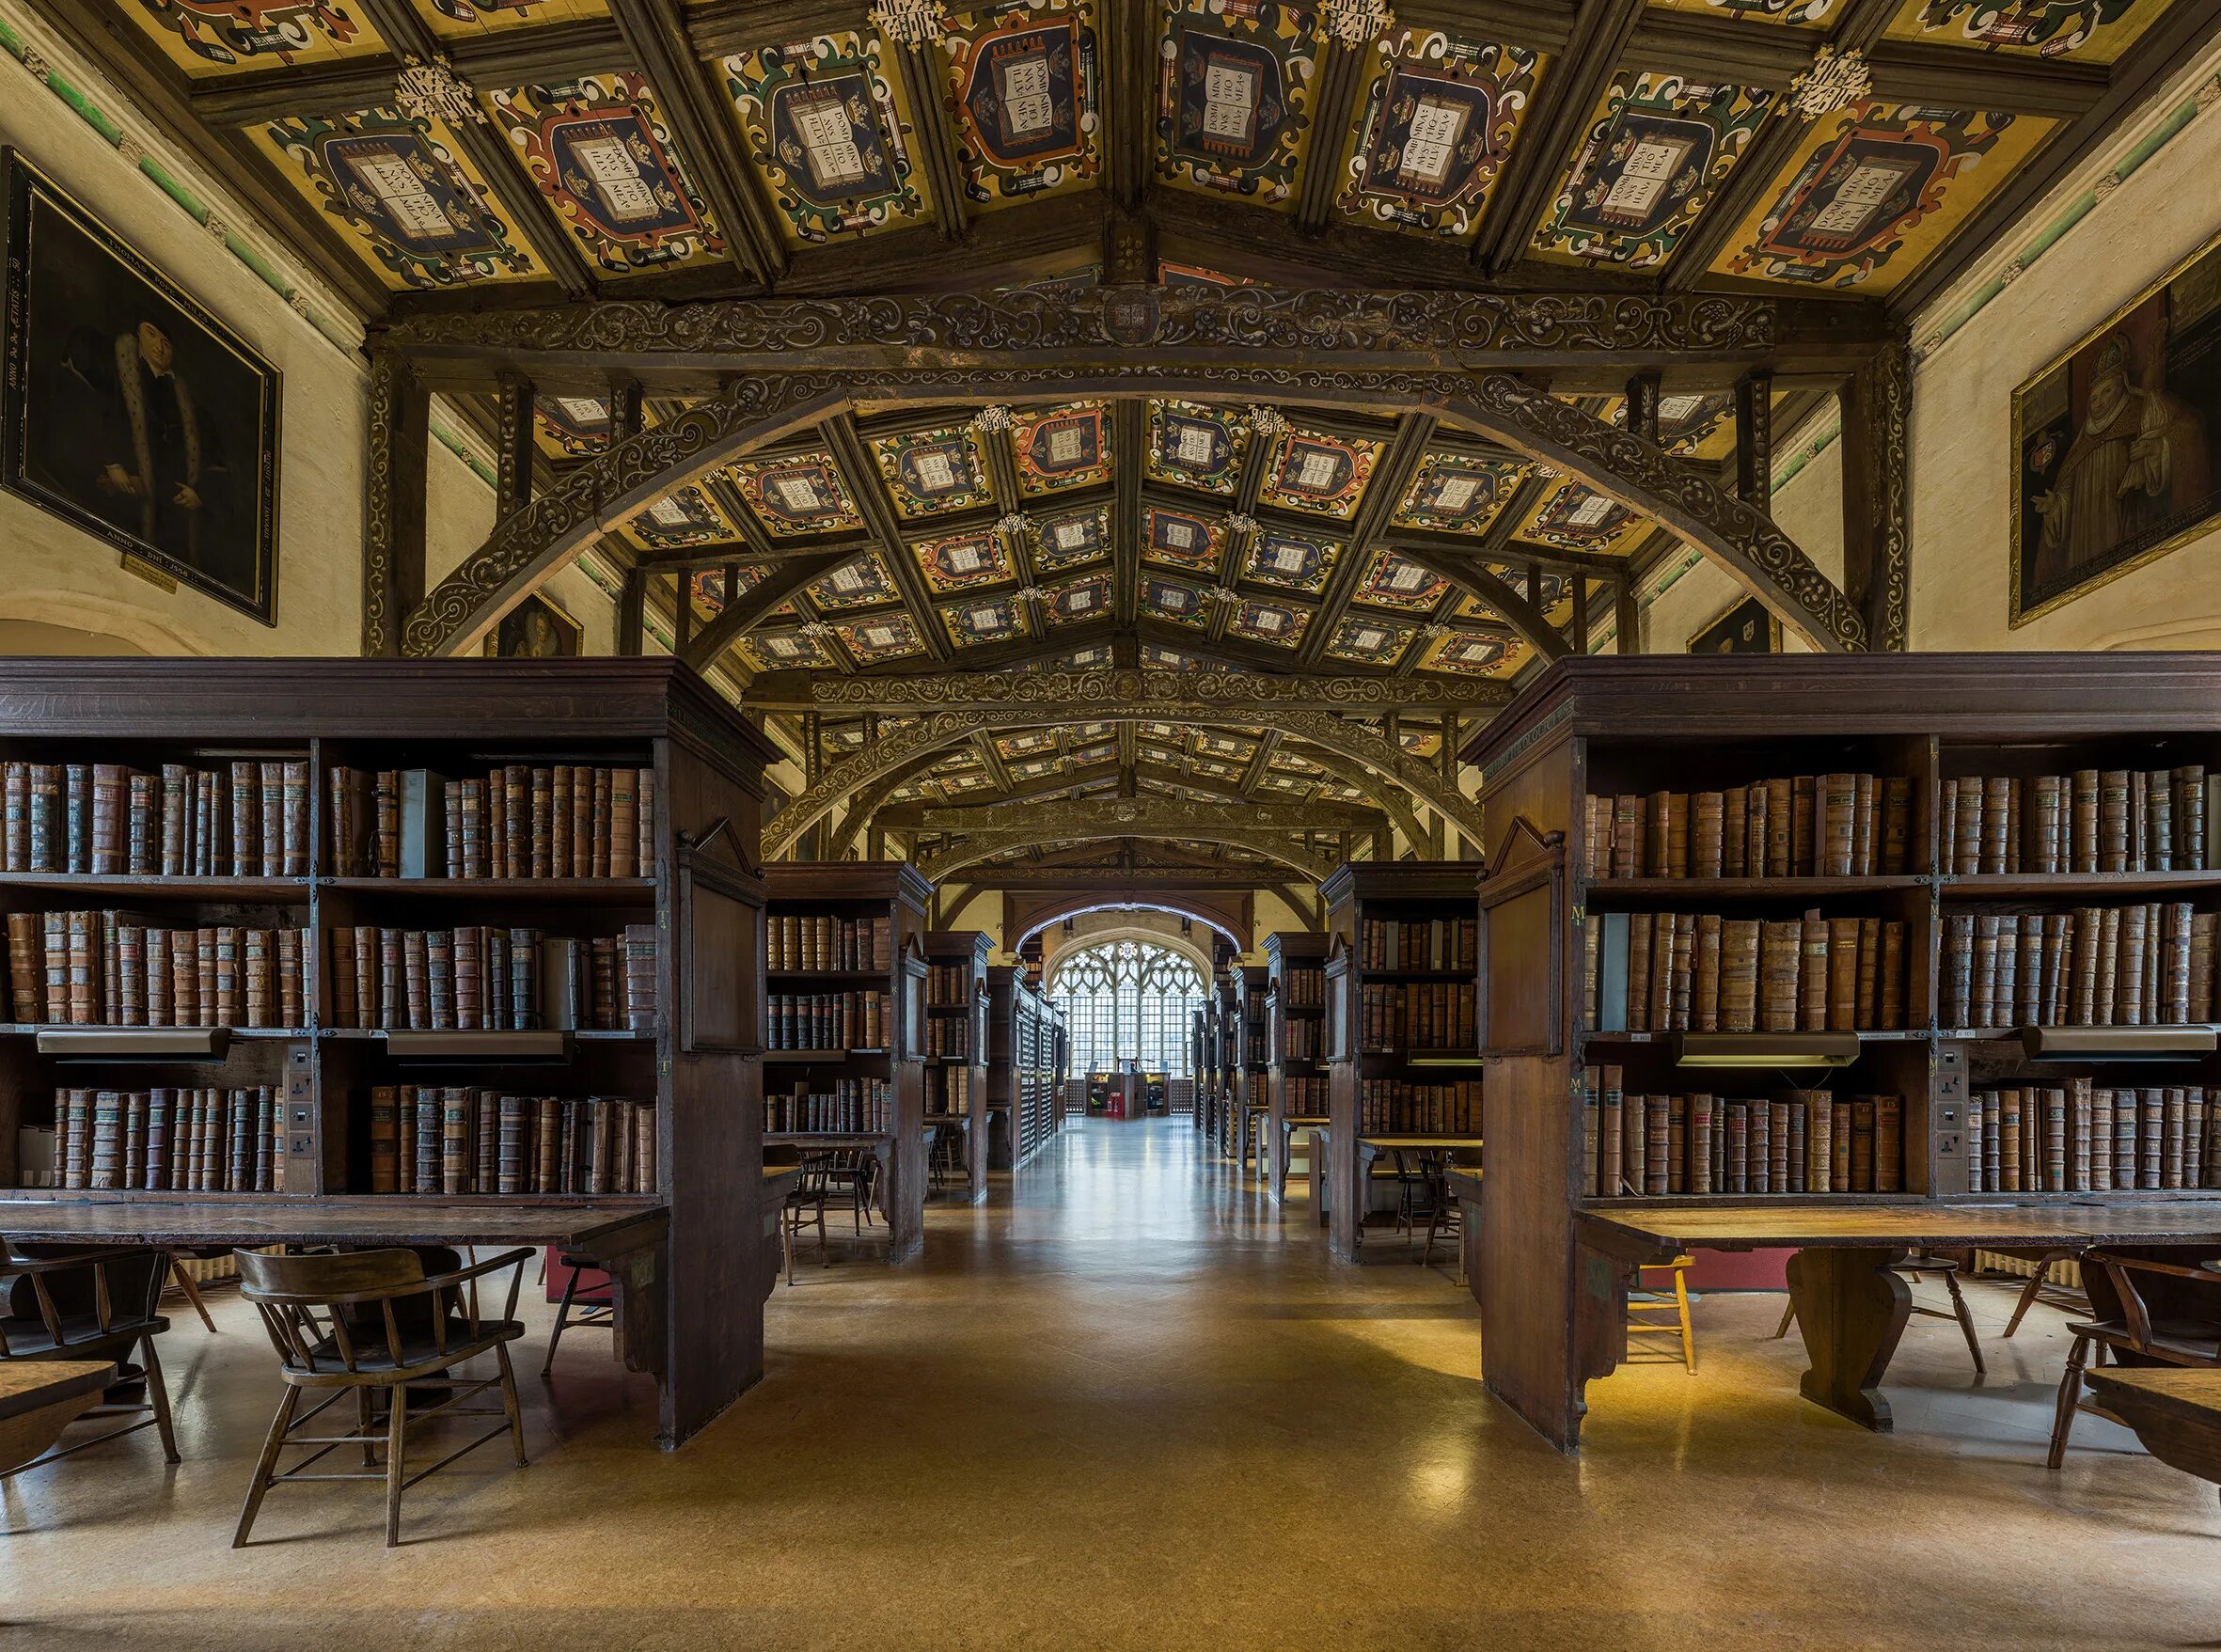 This is our library. Библиотека (Bodleian Library) Оксфорда. Библиотека Хогвартса Бодлианская библиотека Оксфорд. Оксфорд университет Бодлианская библиотека. Бодлеянская библиотека в Оксфорде.